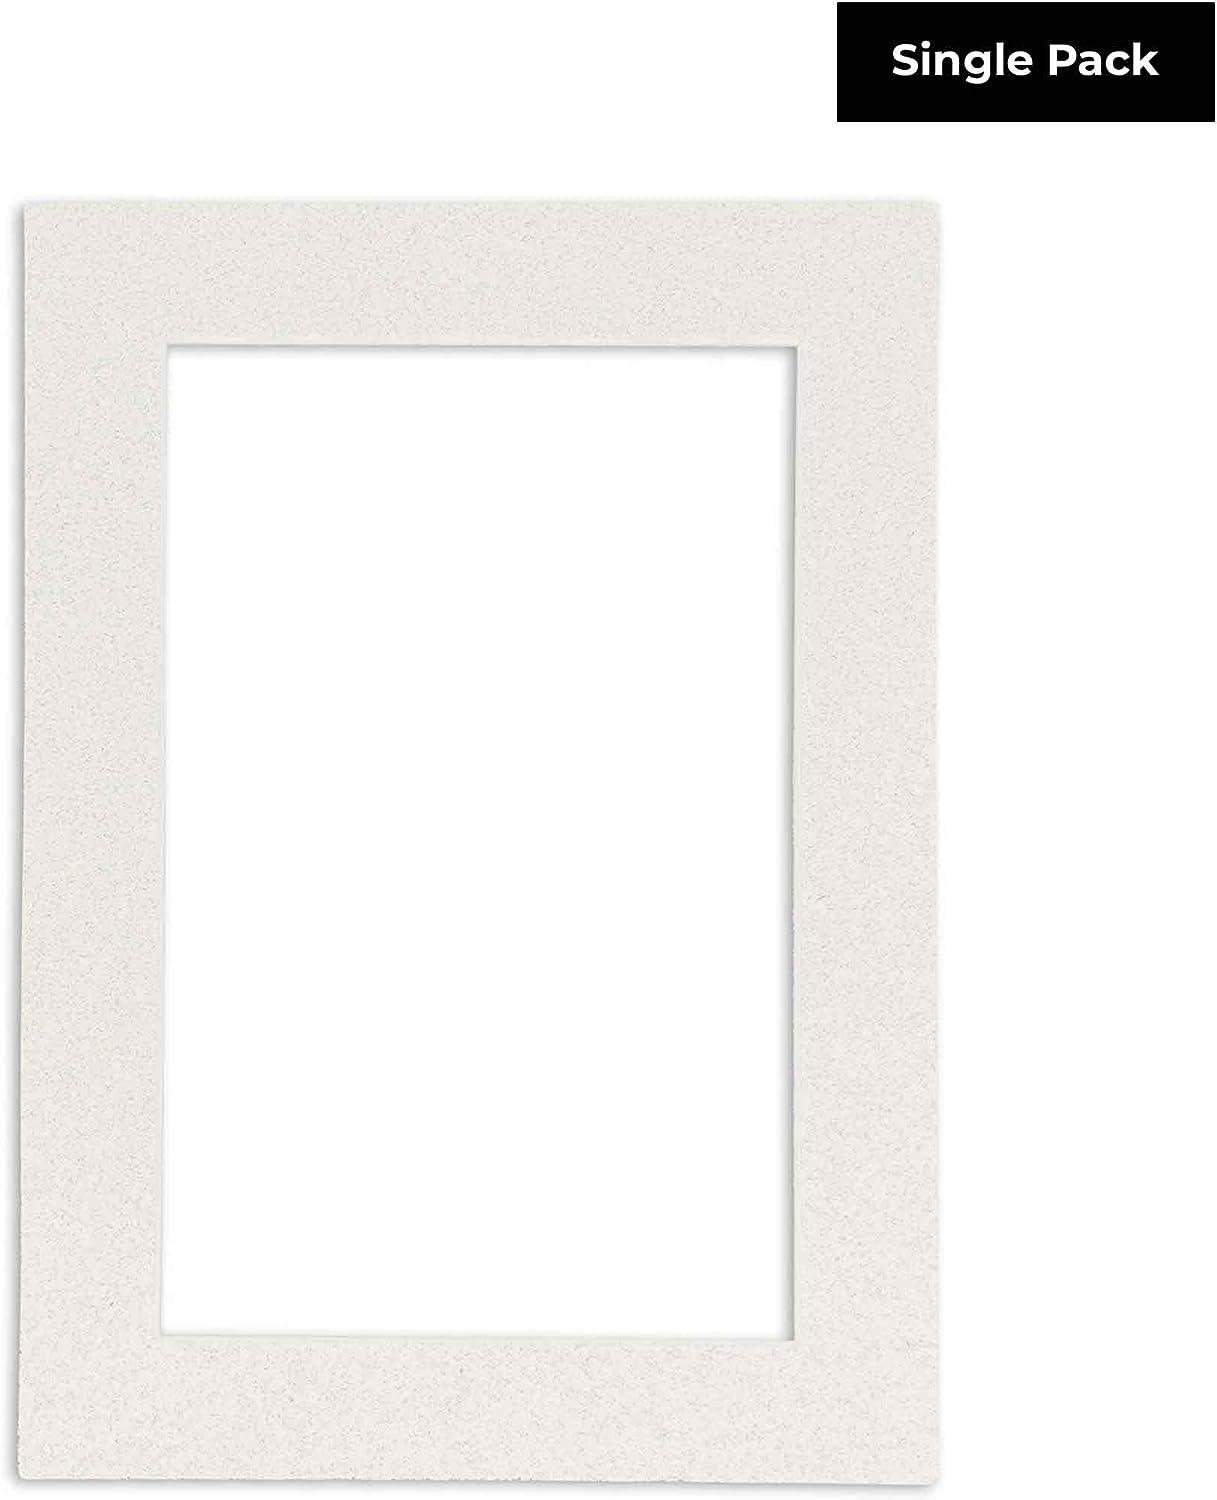 16x20 Mat Bevel Cut for 11x14 Photos - Acid Free Oyster Shell White Precut  Matboard - for Pictures, Photos, Framing - 4-ply Thickness 1-Mat Oyster  Shell White